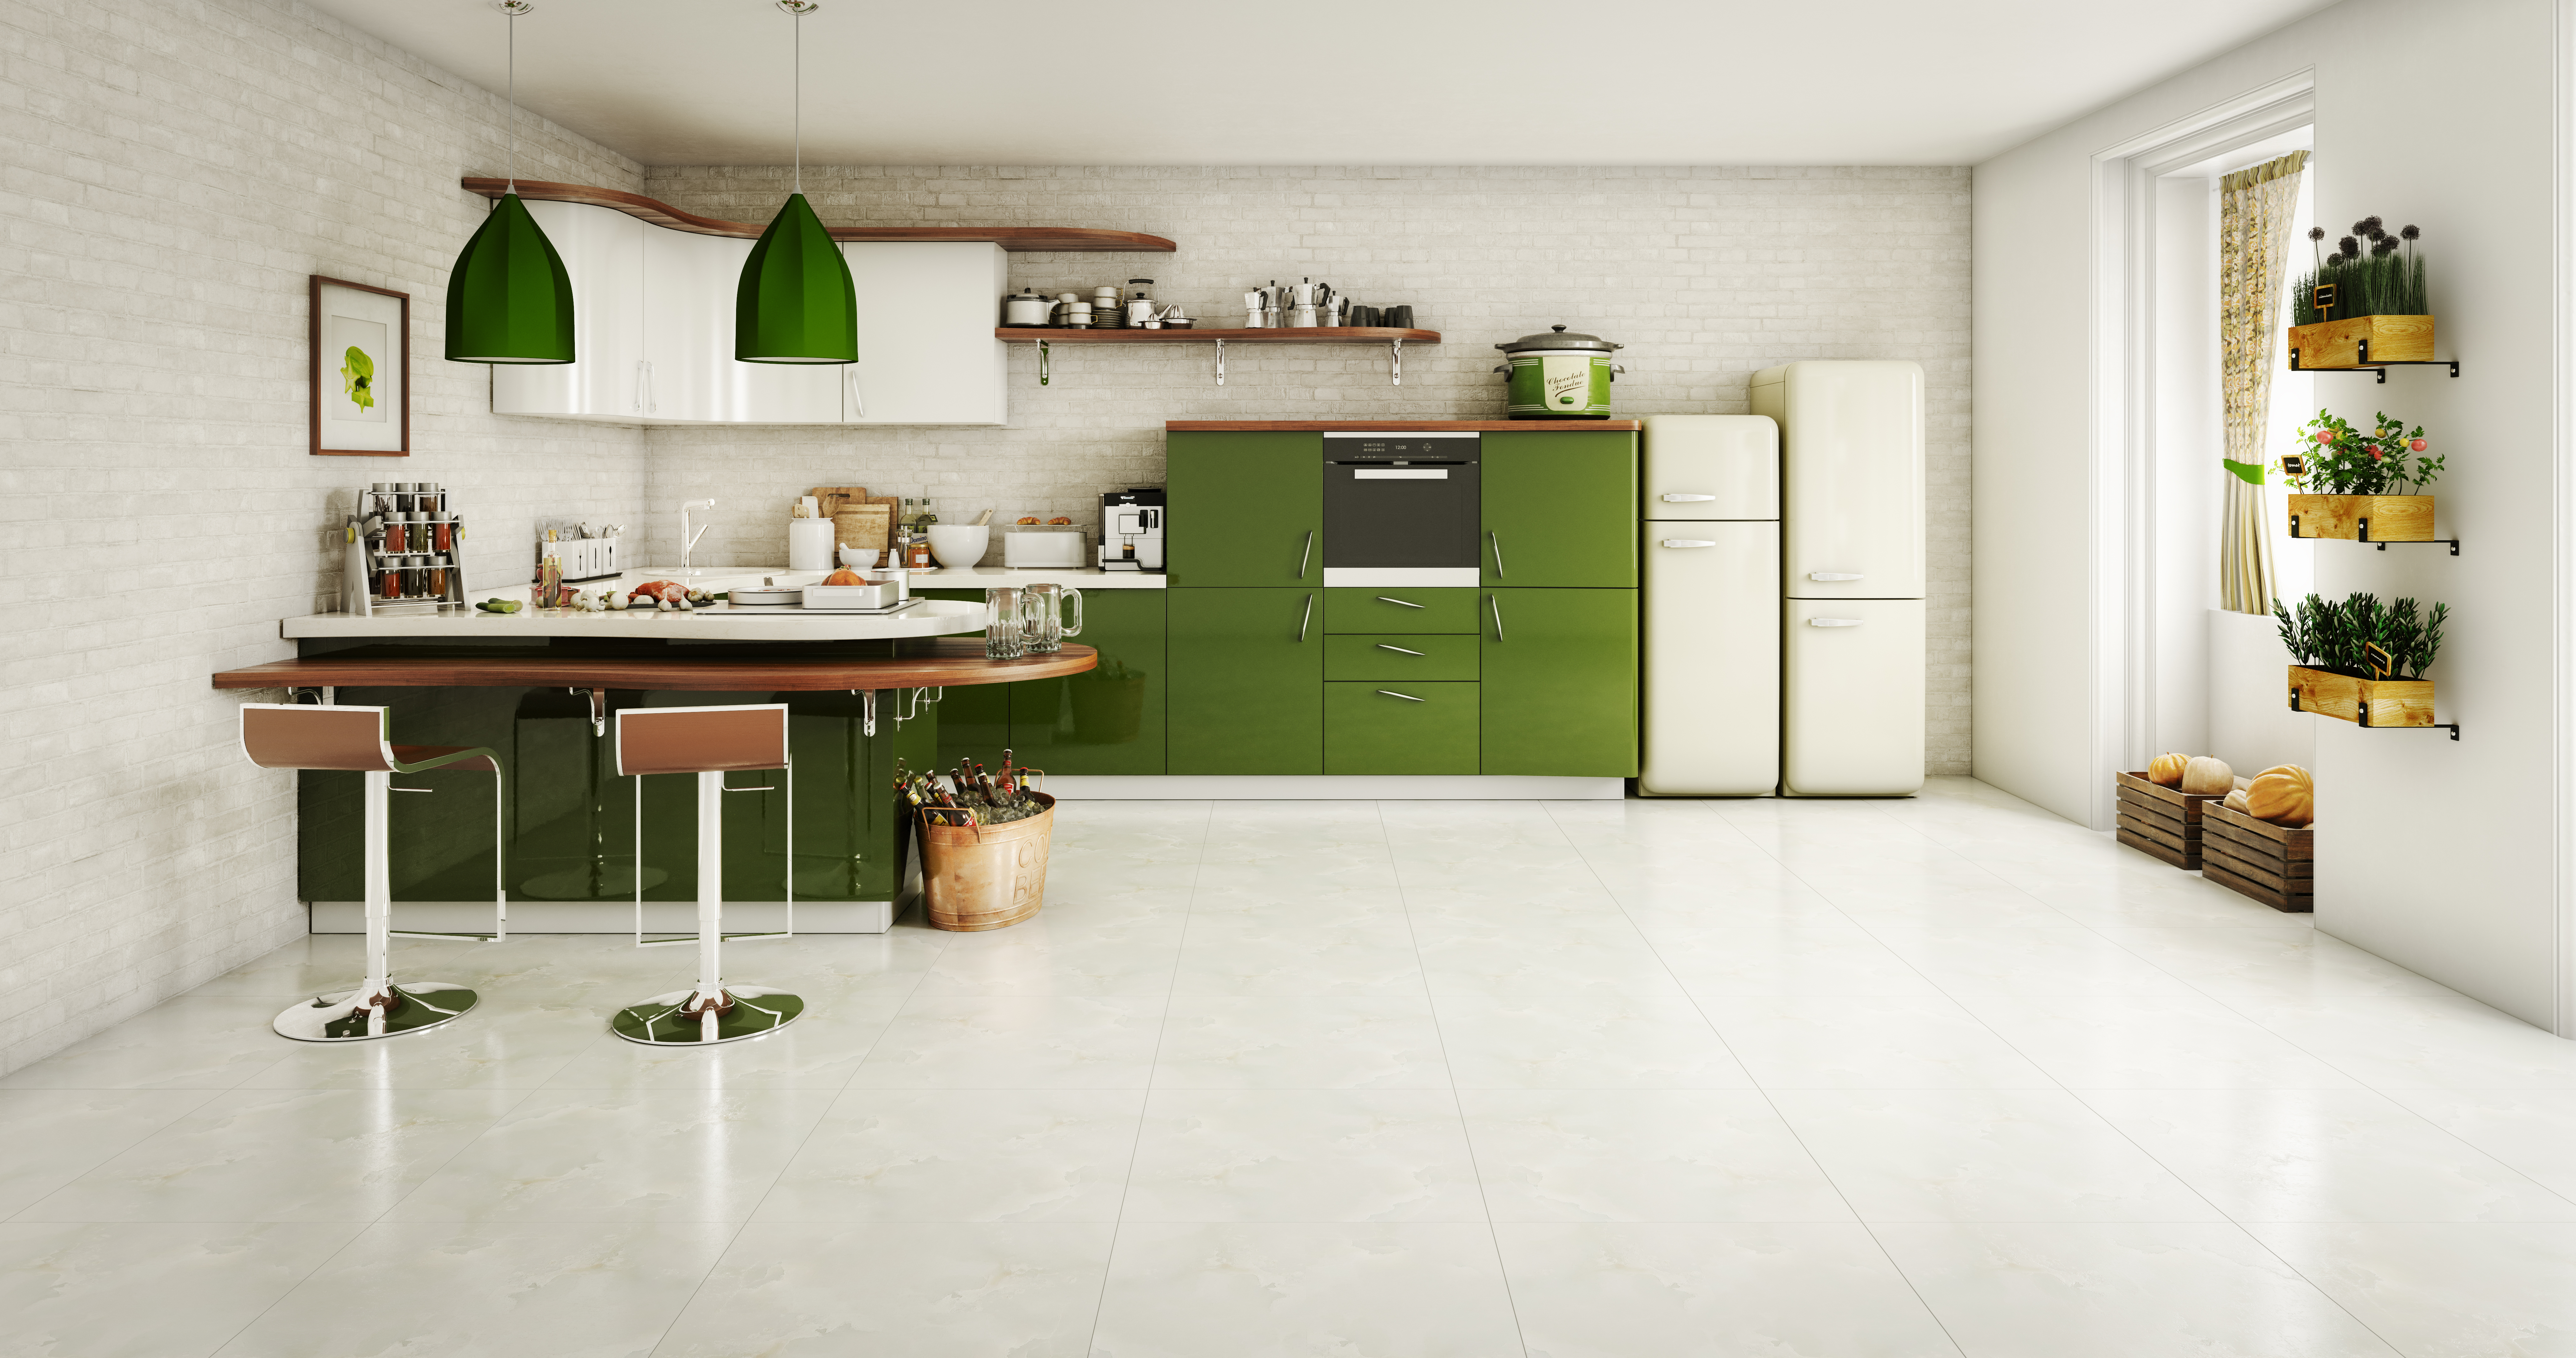 Kitchen with green accents